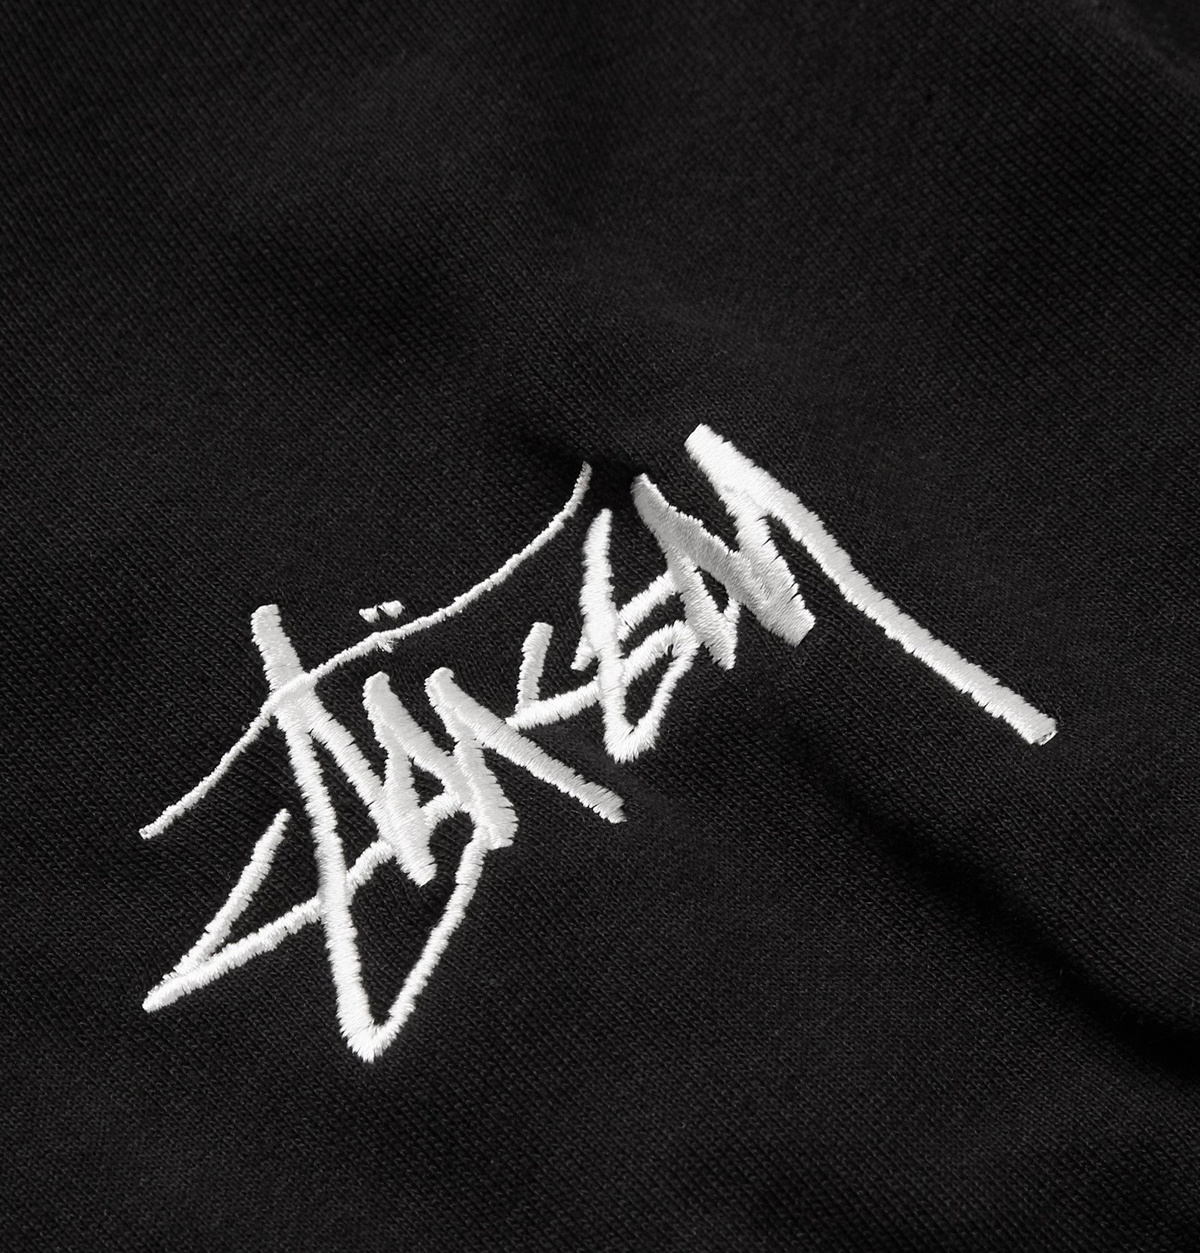 Stussy Logo Embroidery Design Download - EmbroideryDownload